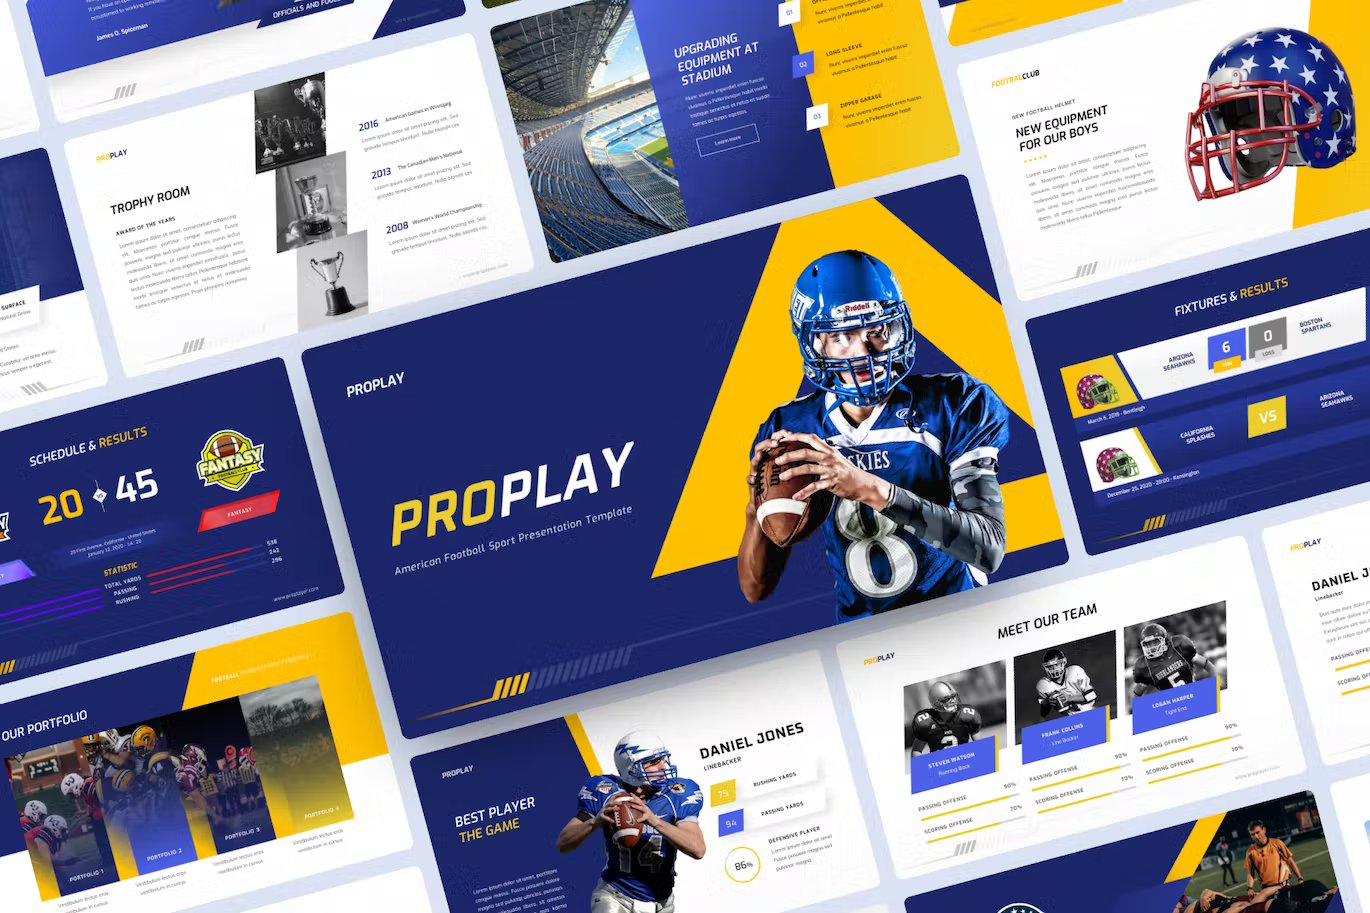 A set of different american football sports powerpoint templates in blue, white and yellow on a light blue background.